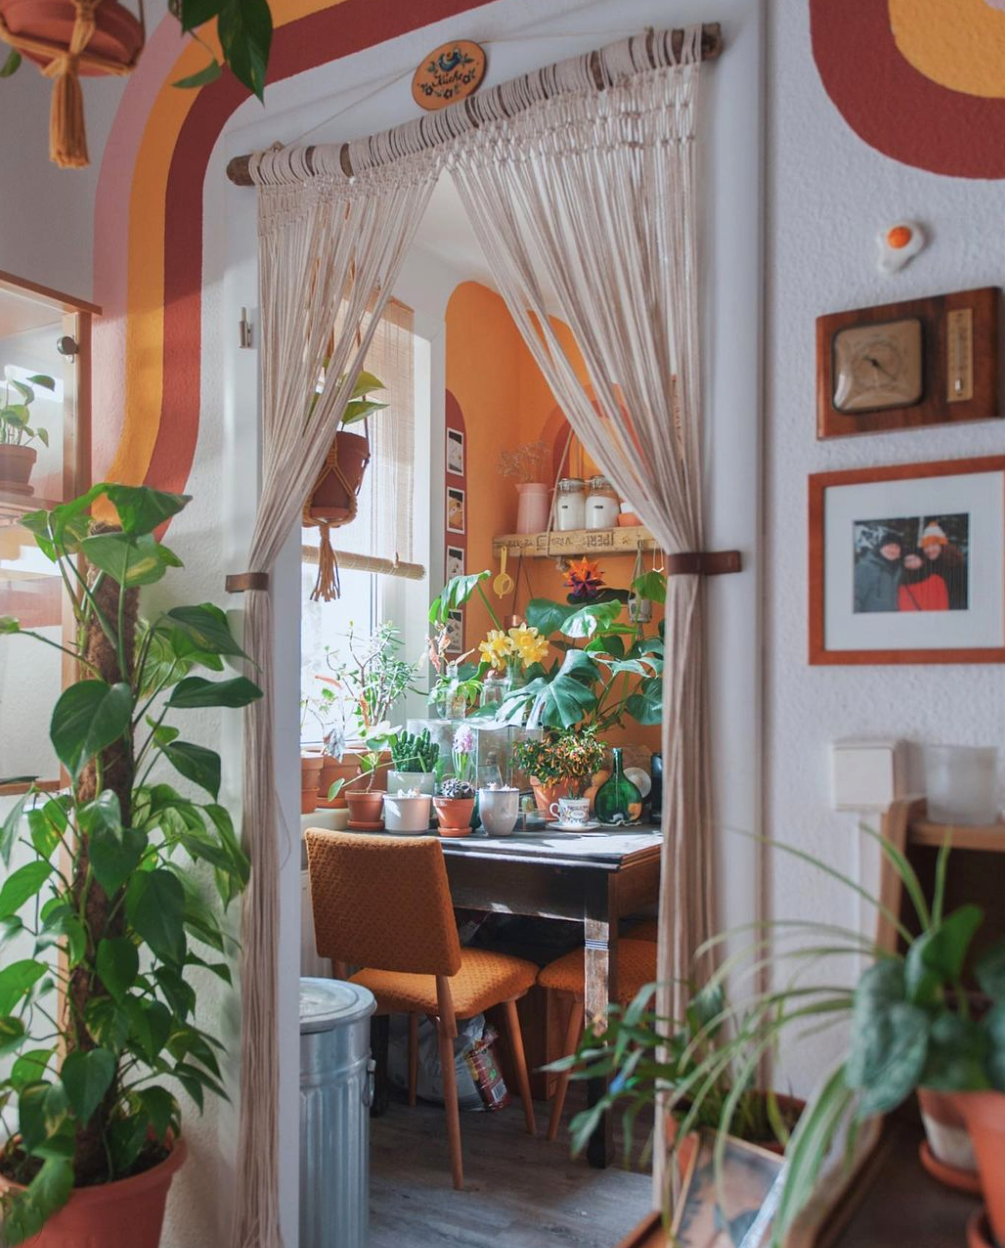 91 Magazine - Colourful, plant-filled Home Tour with Felix Grimm